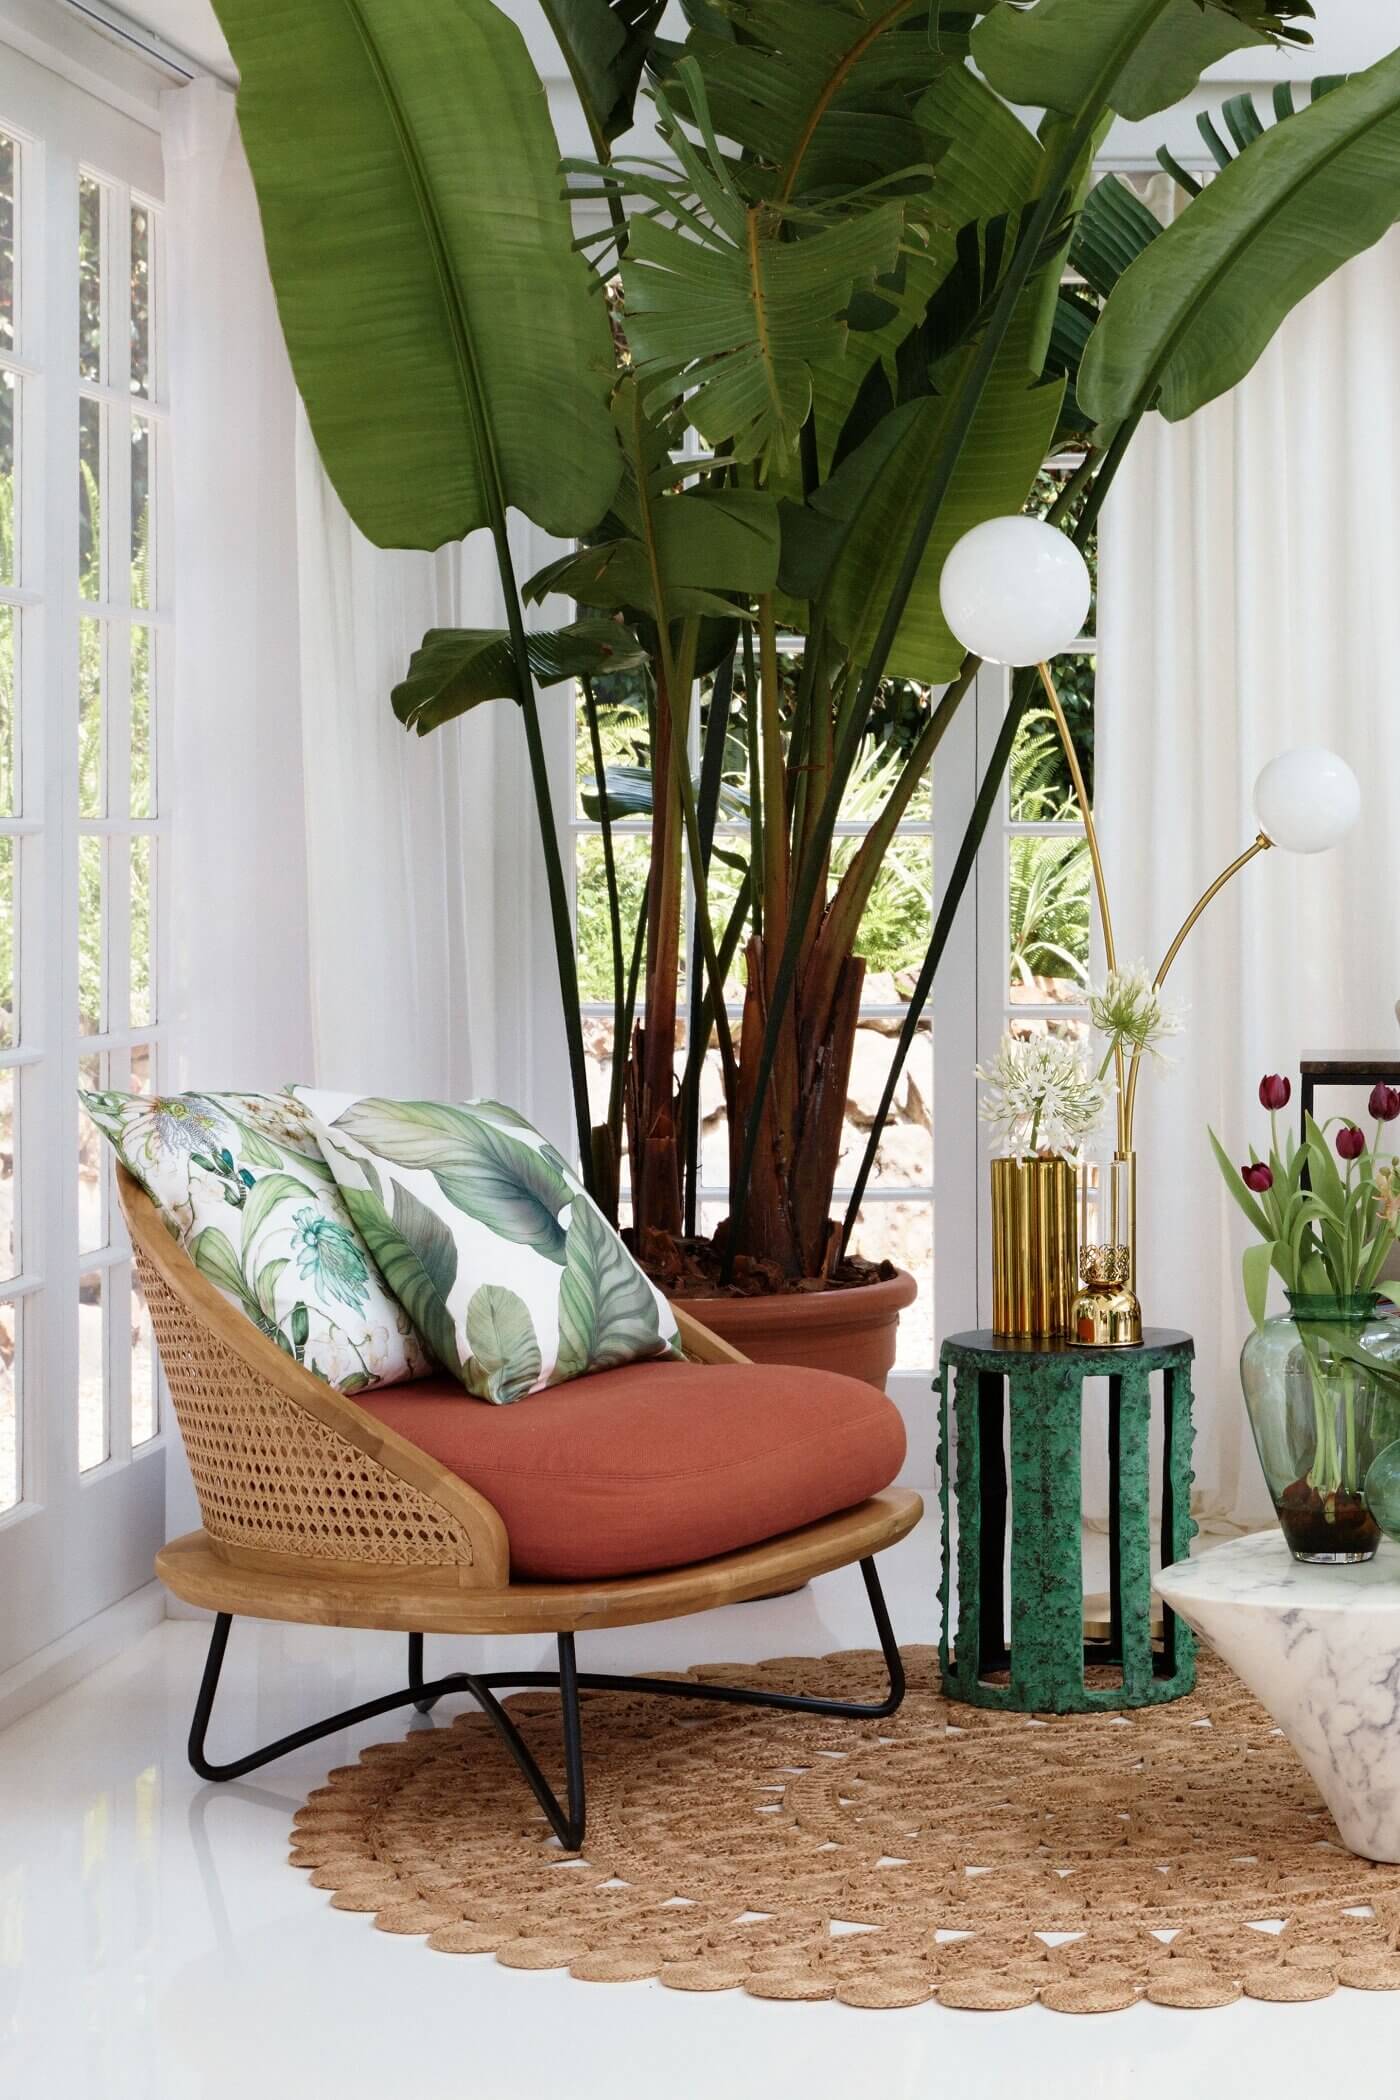 hm home spring collection nordroom3 The H&M Home Spring Collection Brings Nature Into Your Home